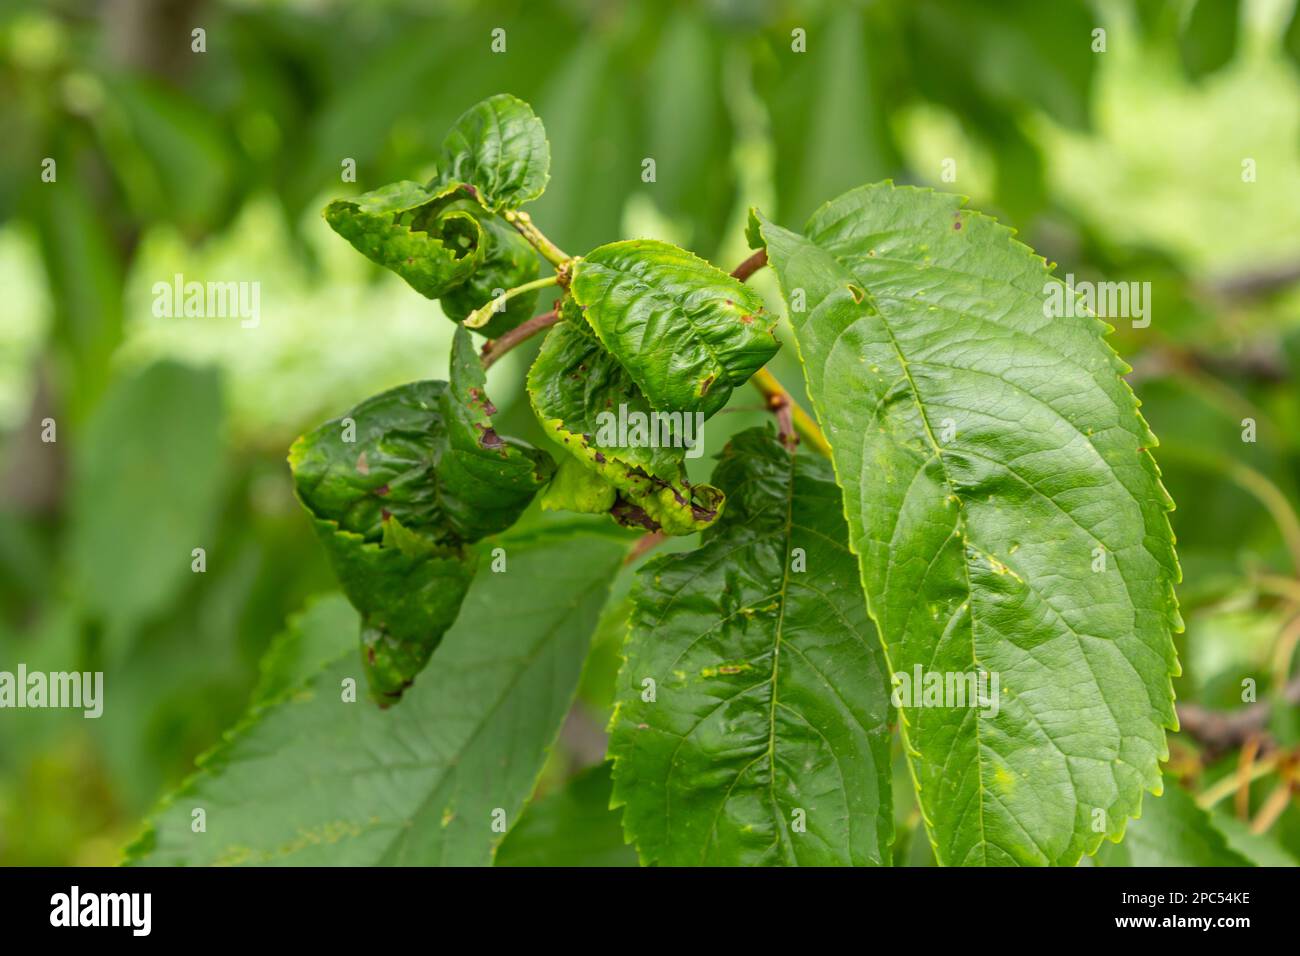 Twisted leaves of cherry. Cherry branch with wrinkled leaves affected by black aphid. Aphids, Aphis schneideri, severe damage from garden pests. Stron Stock Photo